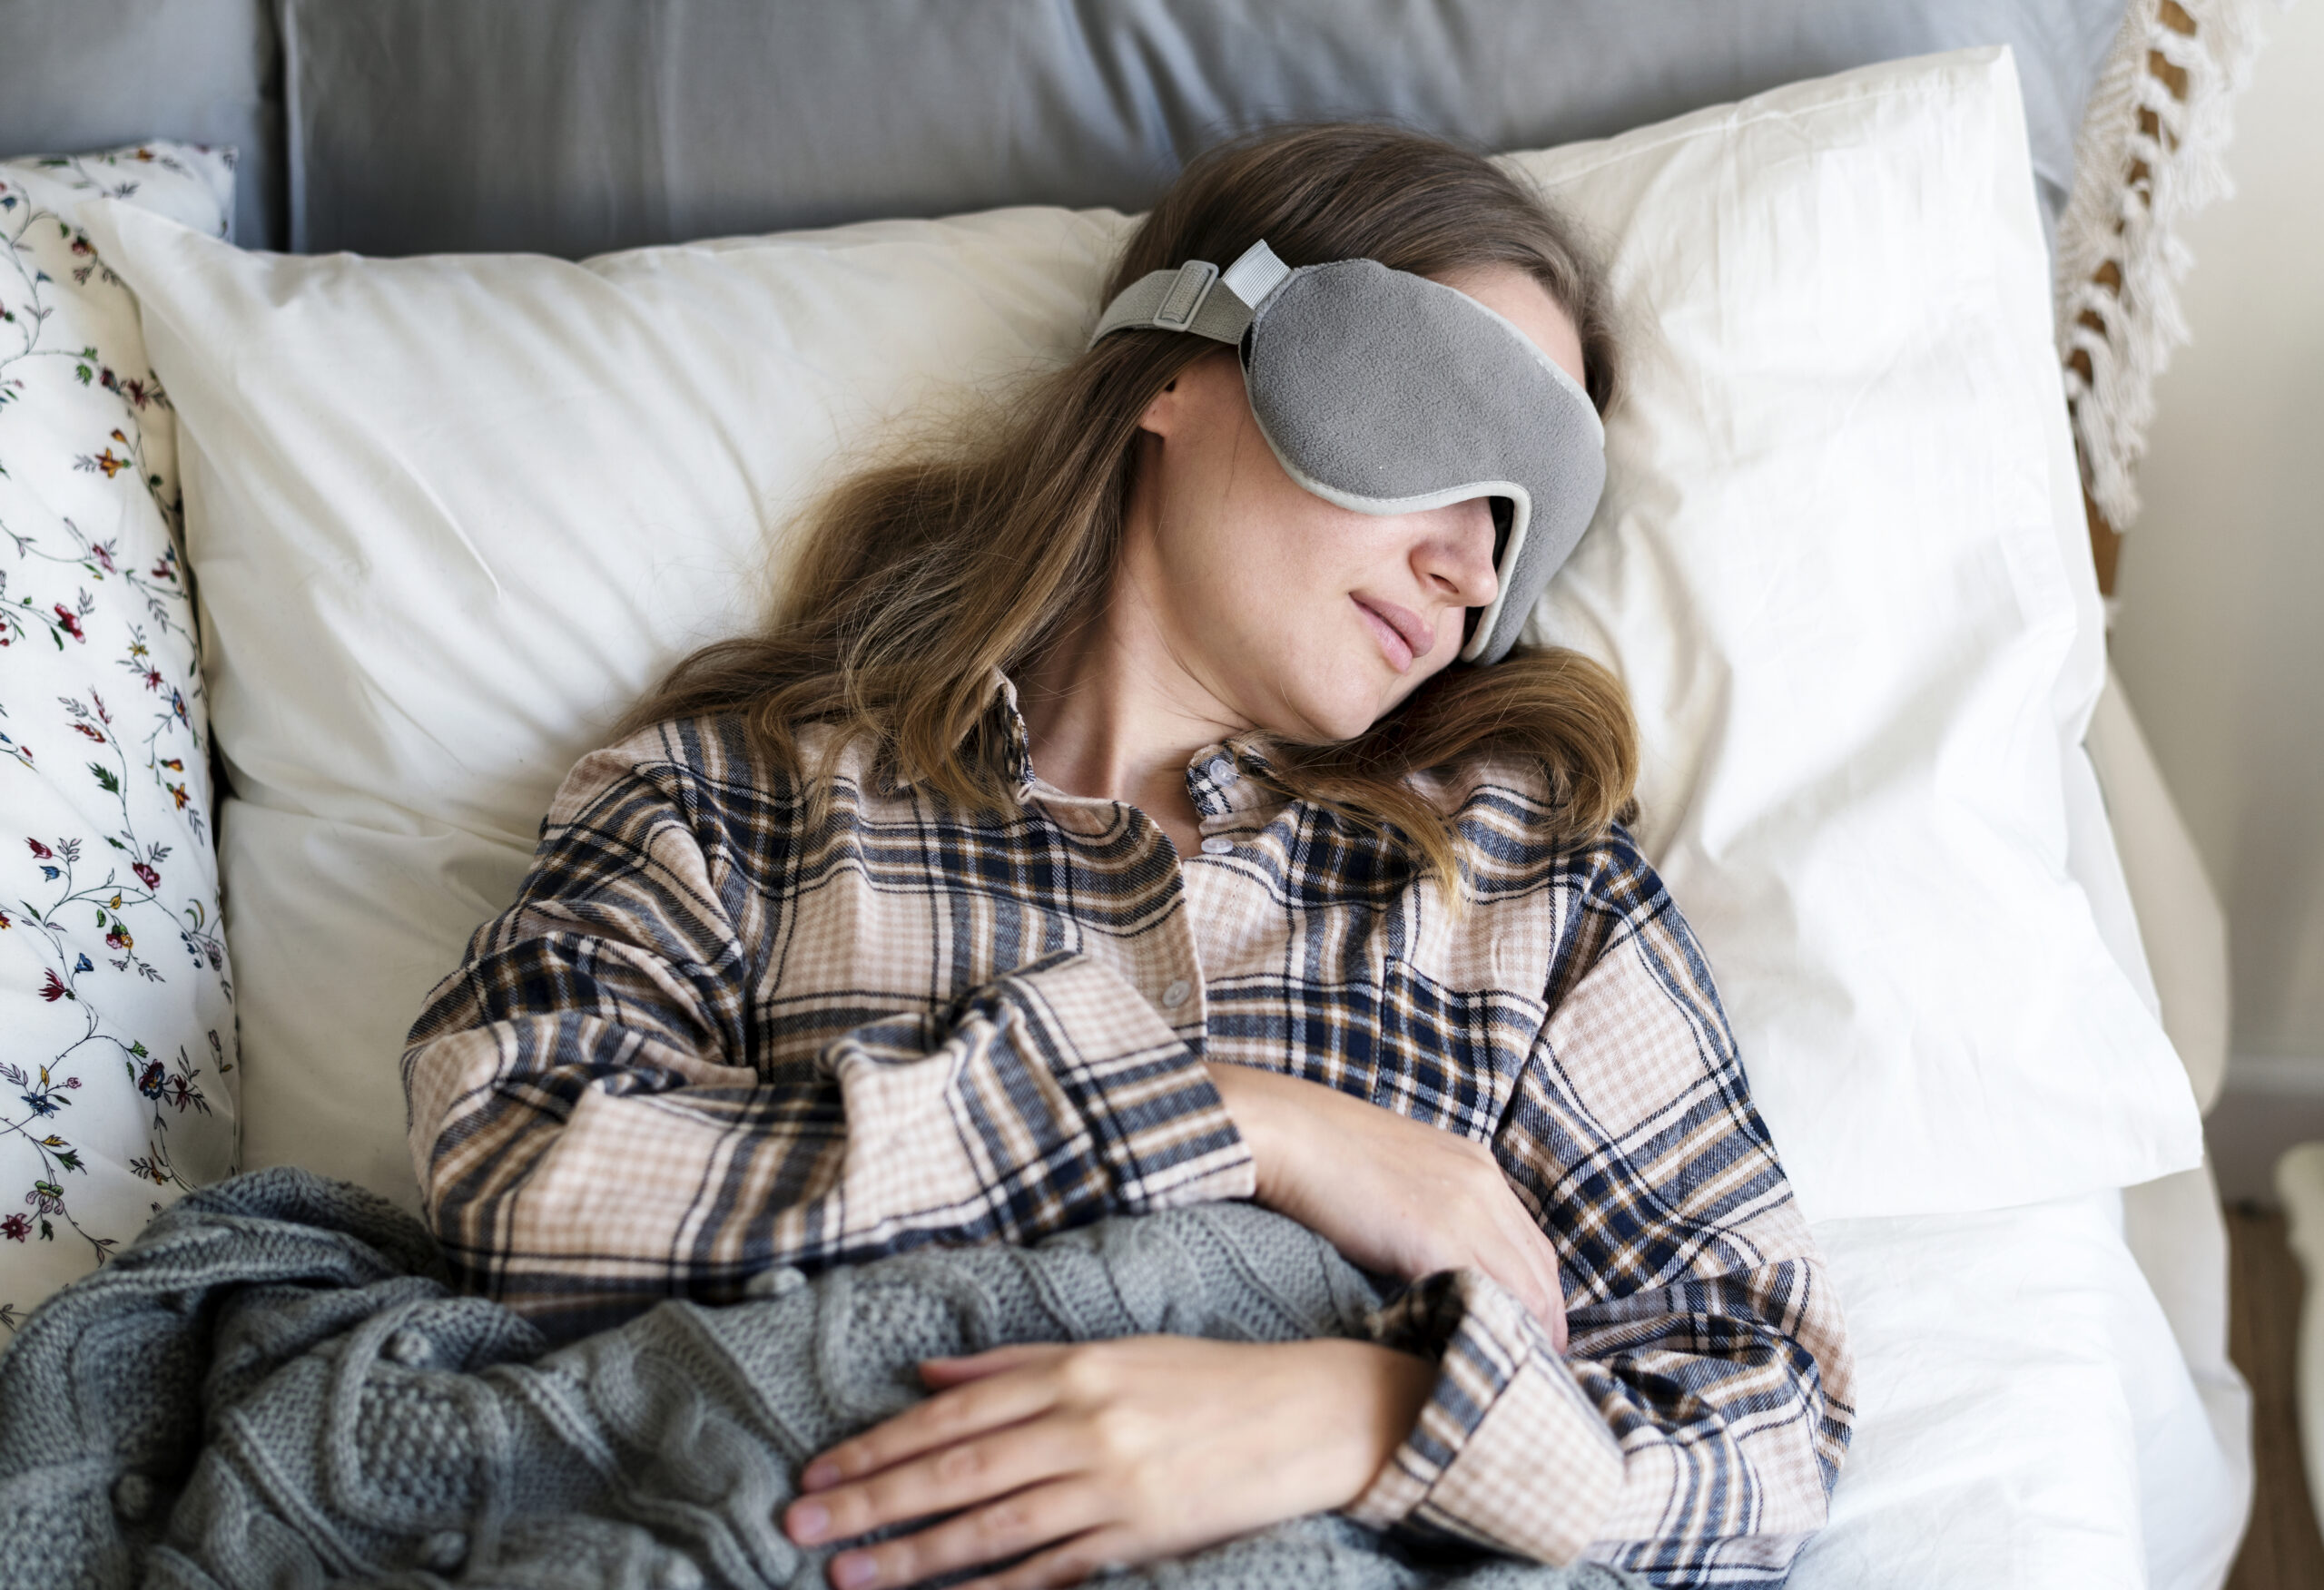 Photo of a white woman lying in bed in her pajamas, with an eye mask on and a blanket on top of her.